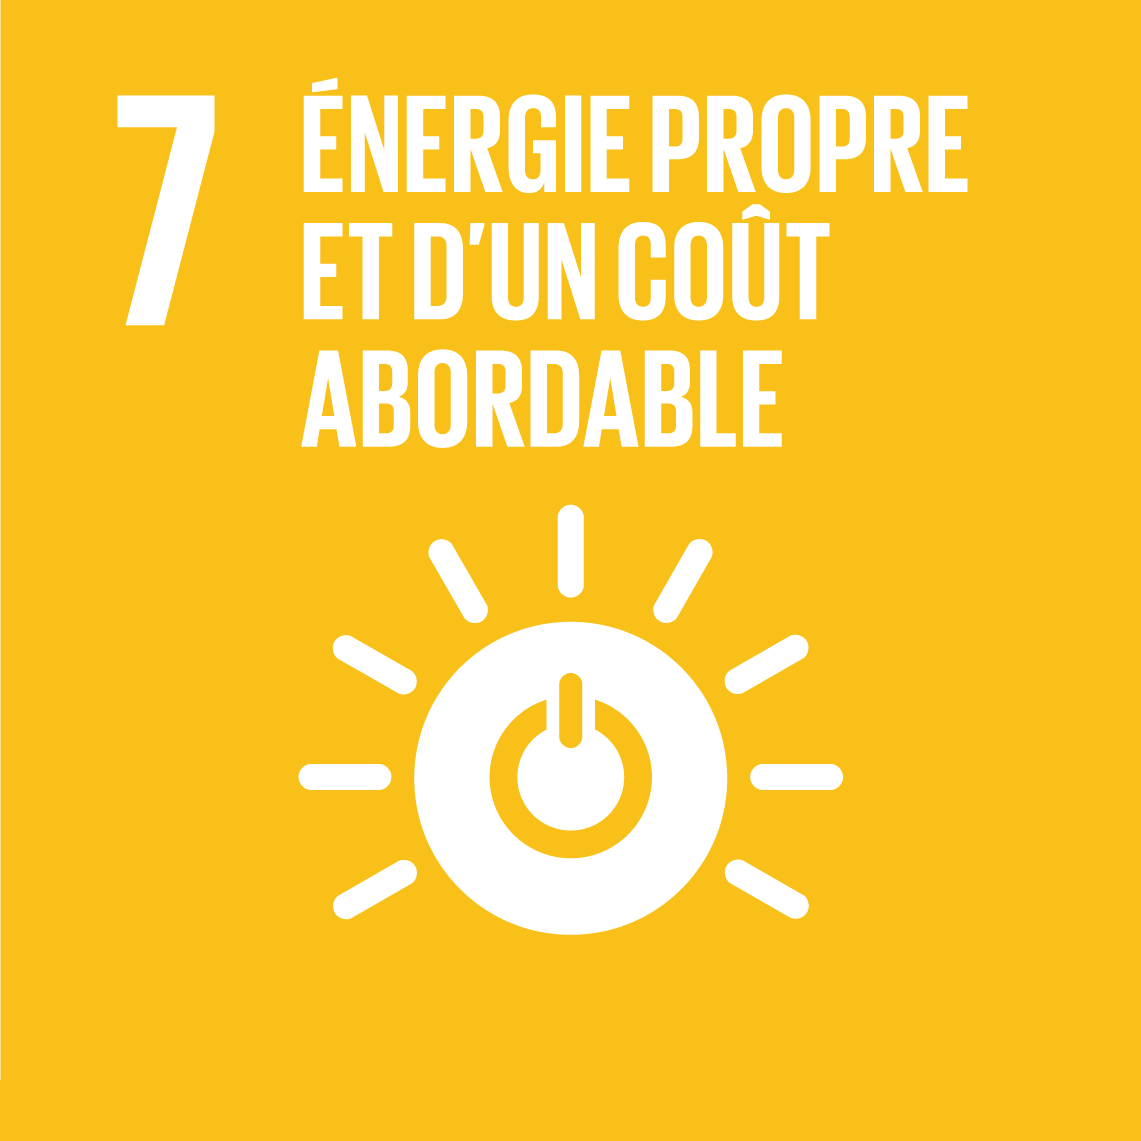 Sustainable Development Goals 7 - Affordable and clean energy